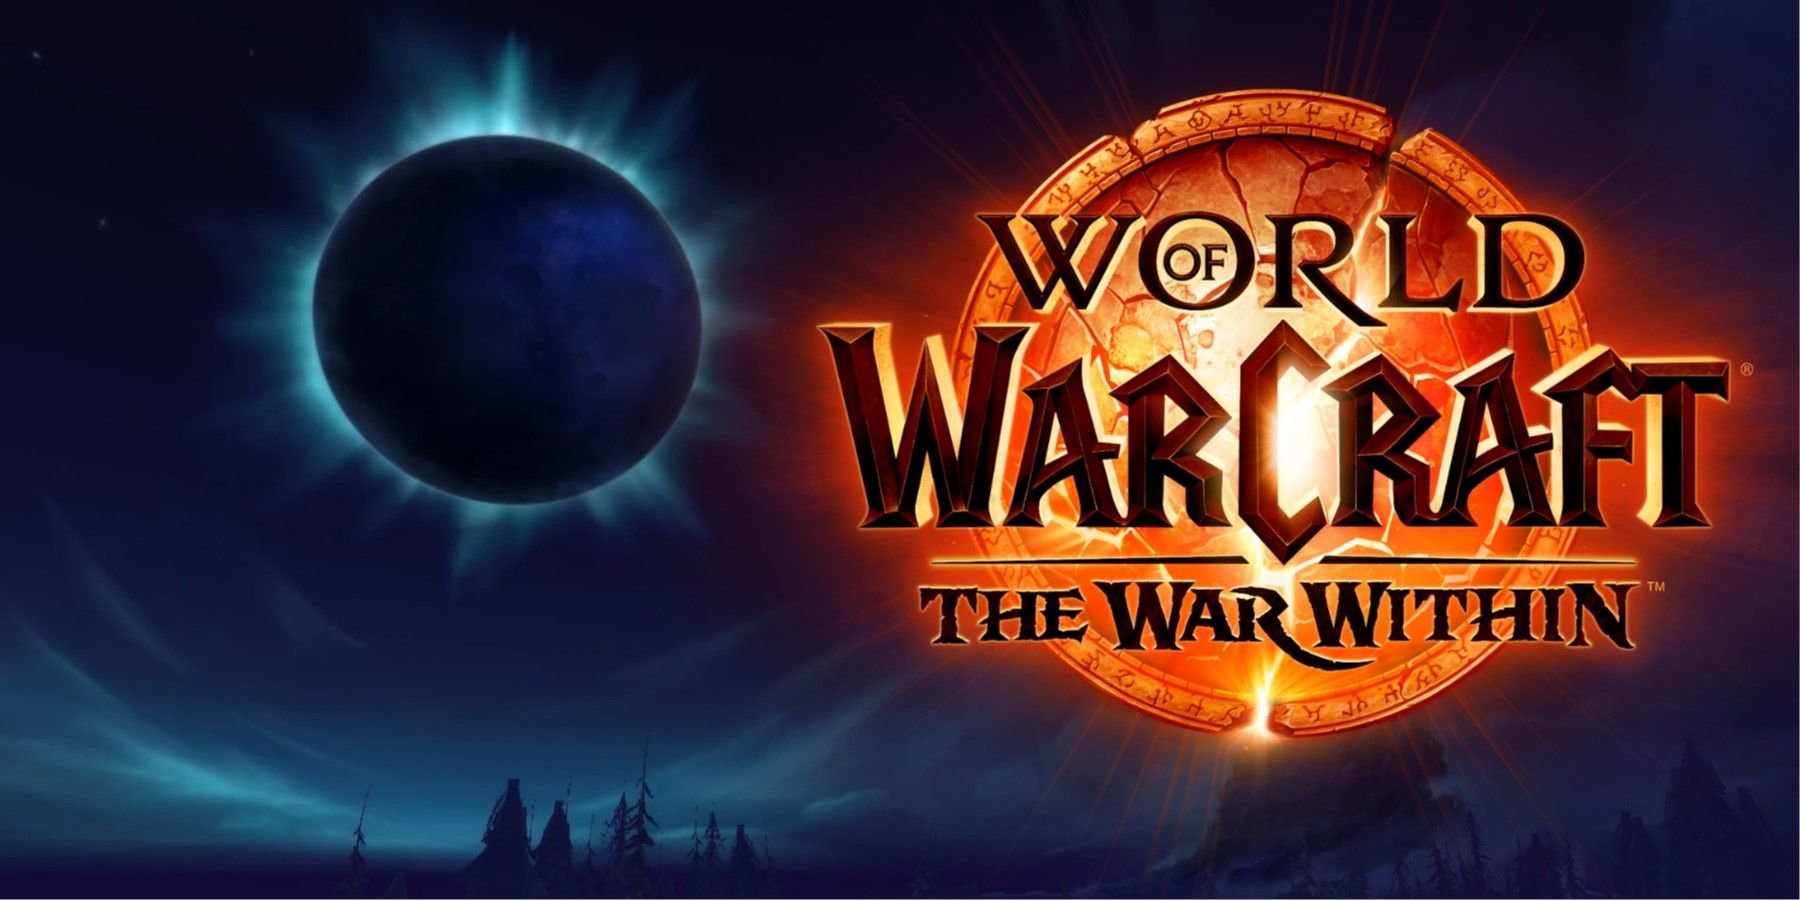 World of Warcraft Boss Drops an Overpowered Weapon in Season of